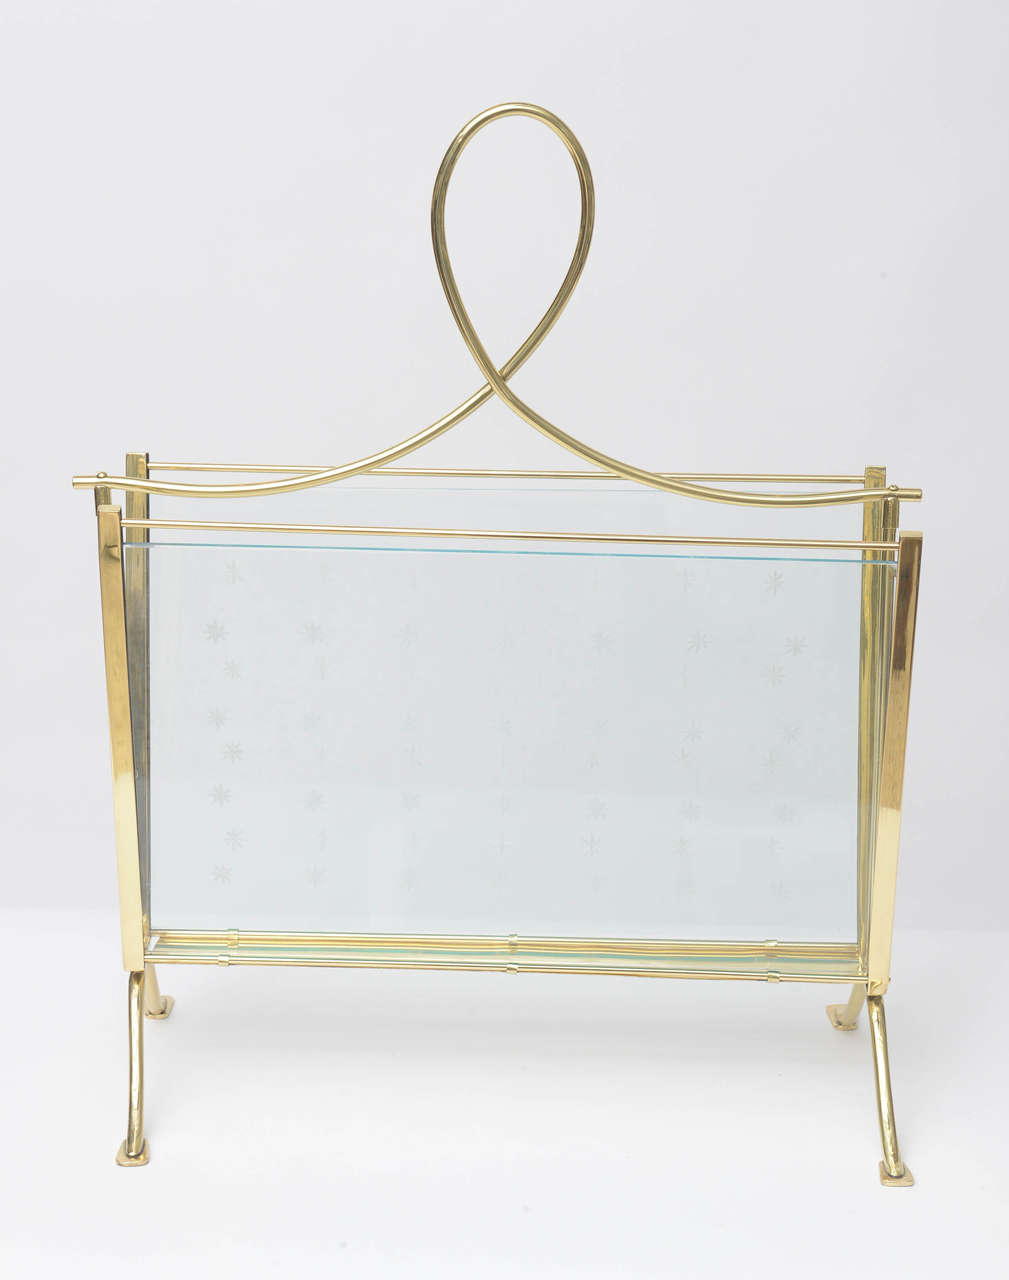 A glamorous, 1940s Italian magazine rack with polished brass frame and cut-glass side panels, etched with a delicate star pattern. Professionally polished.